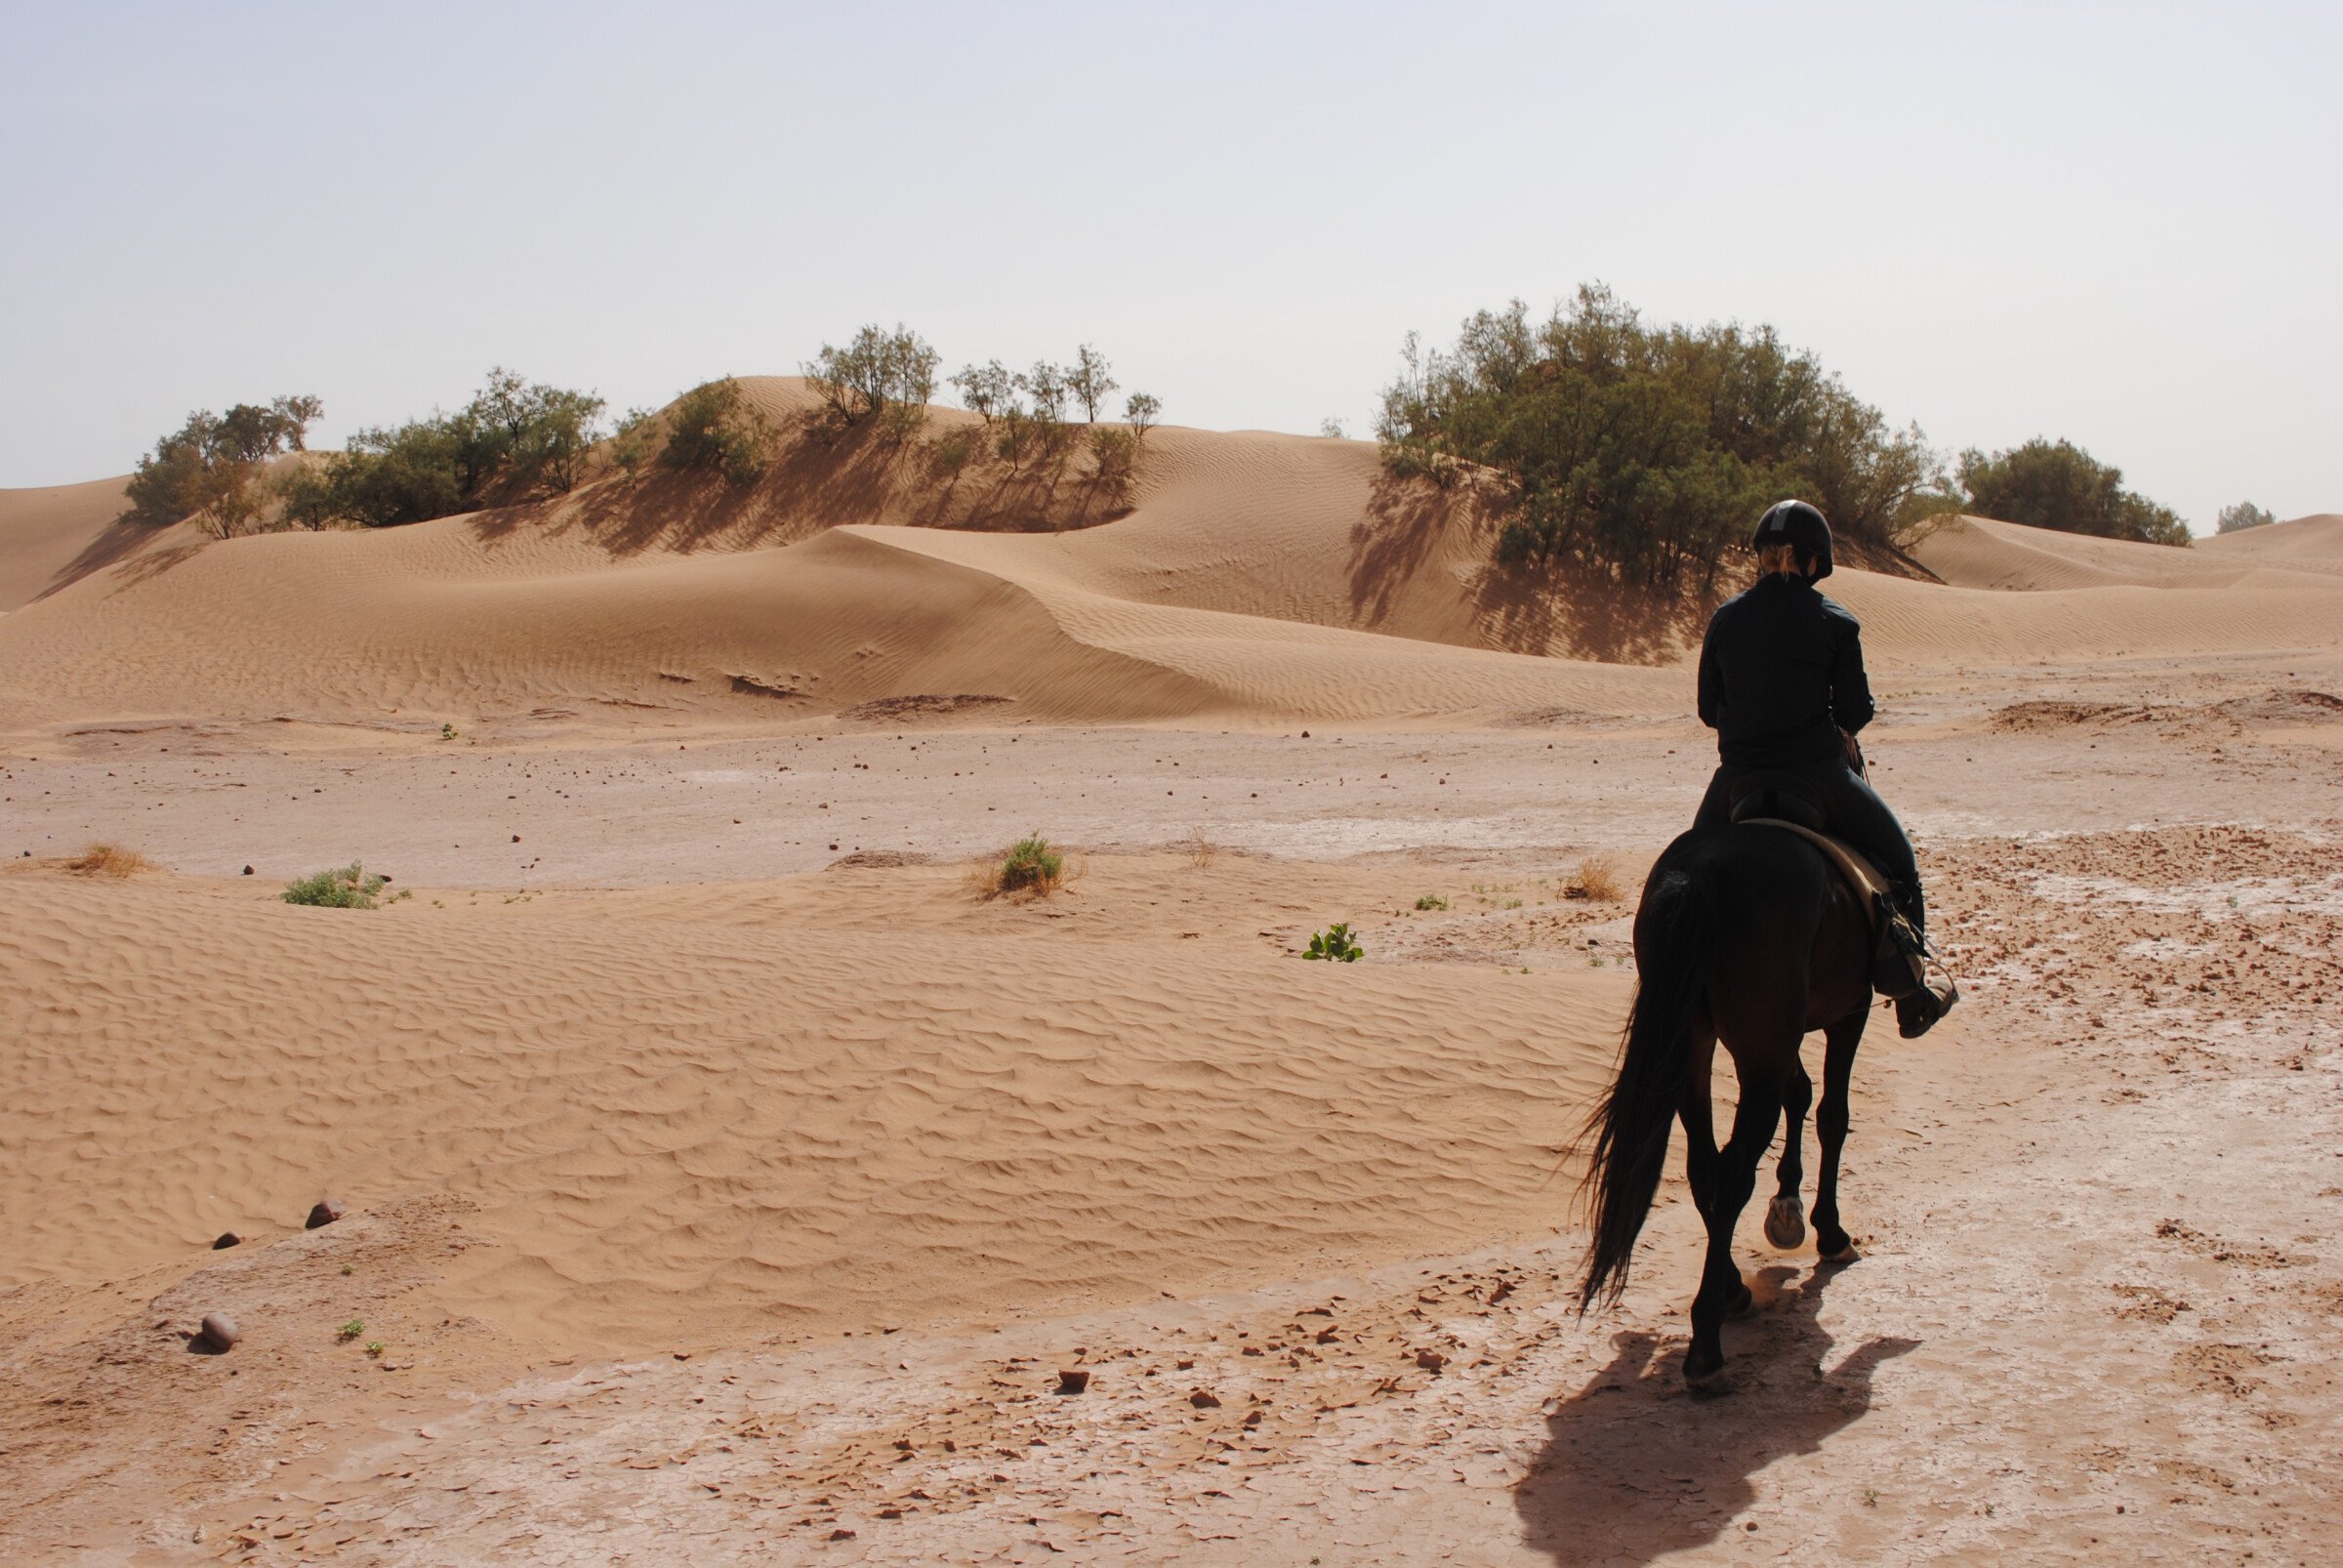 The benefits of a horse ride: trekking in the desert